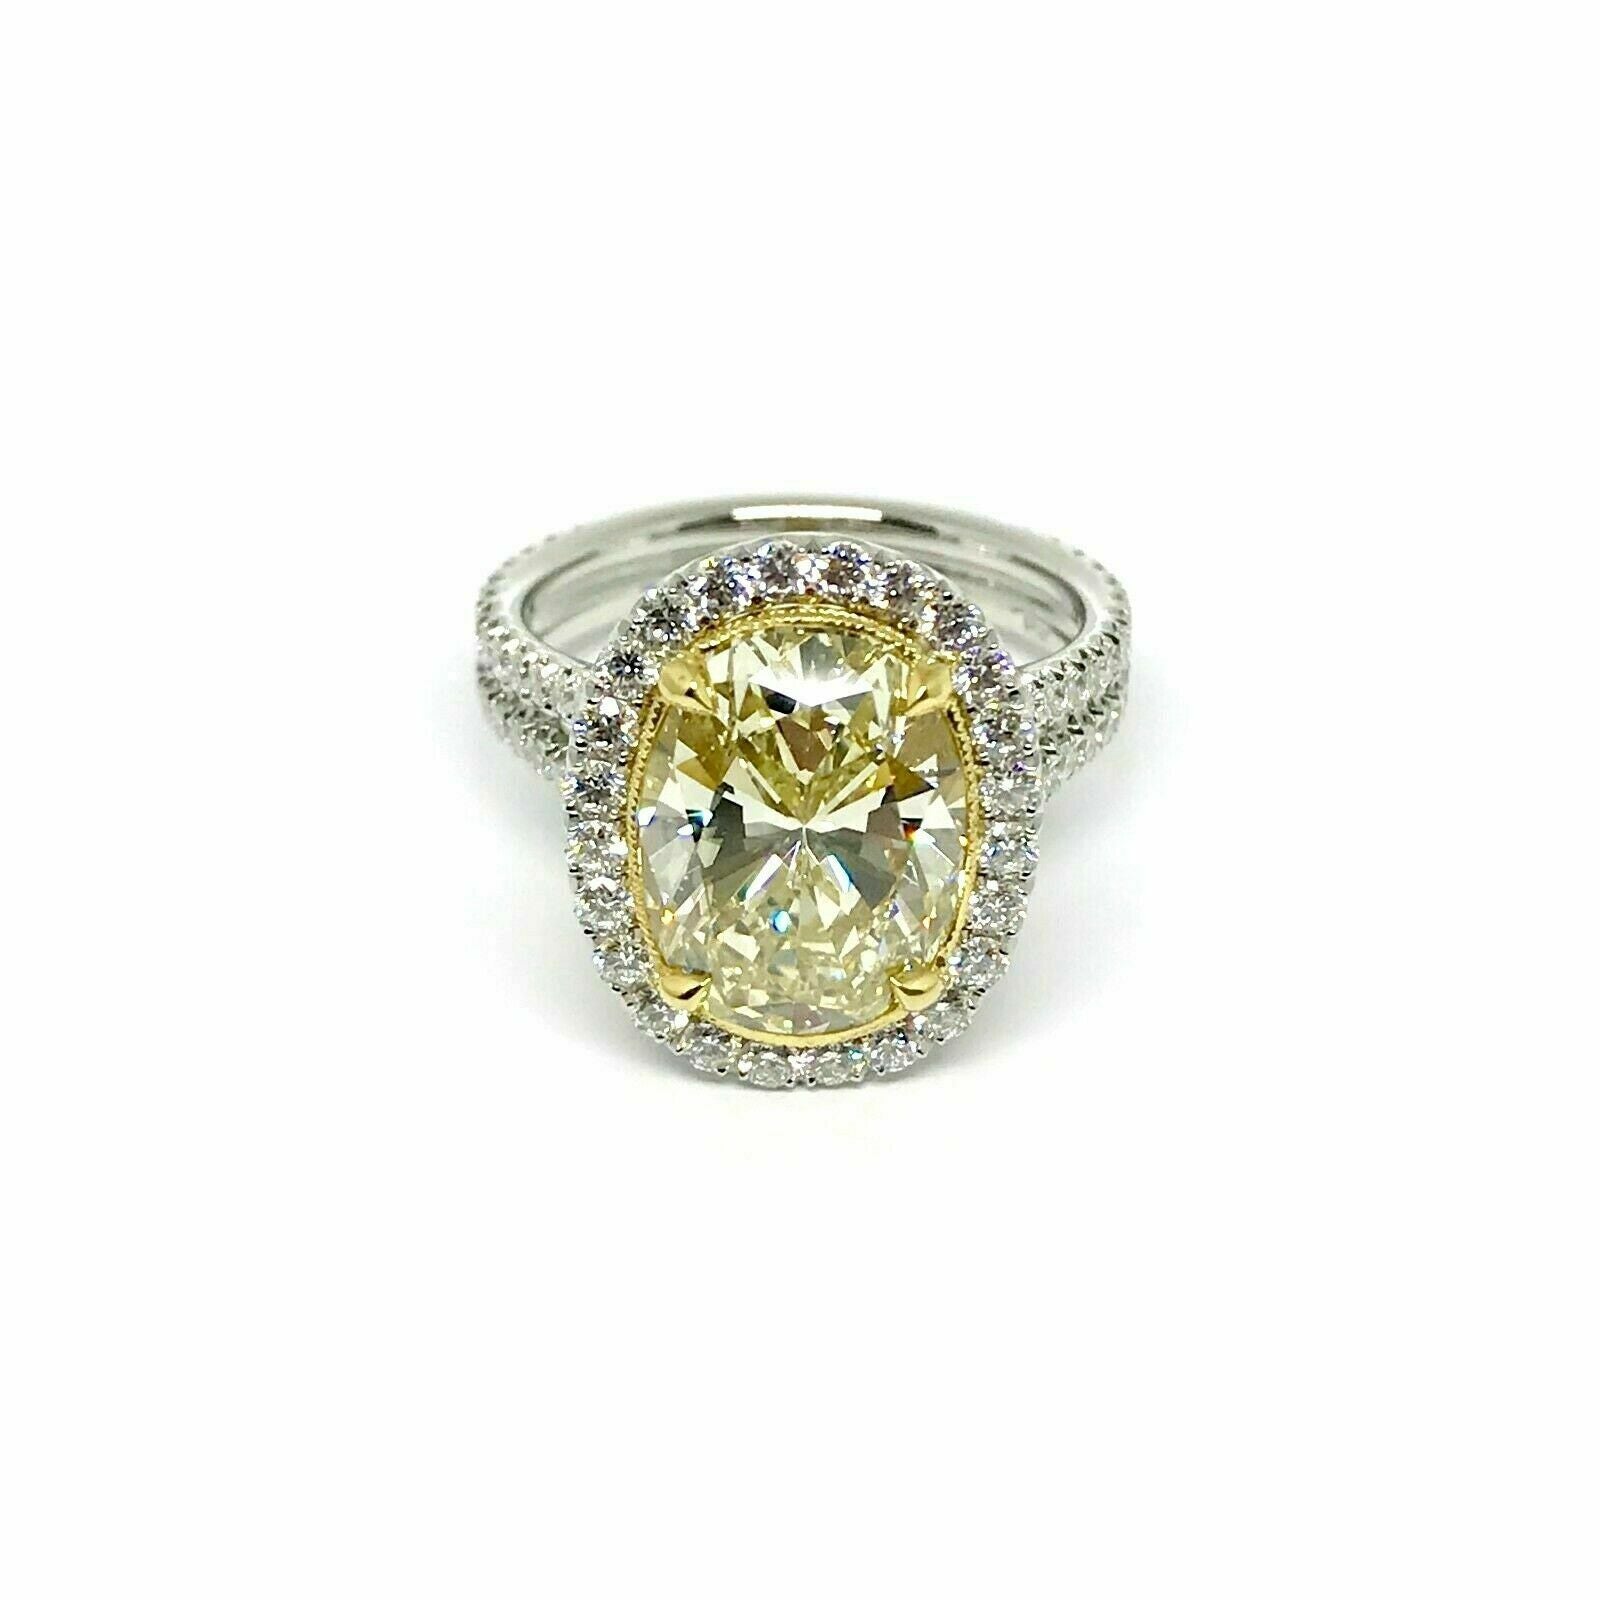 Platinum Ring GIA Certified 4.02Ct. Natural Fancy Light Yellow Oval Diamond